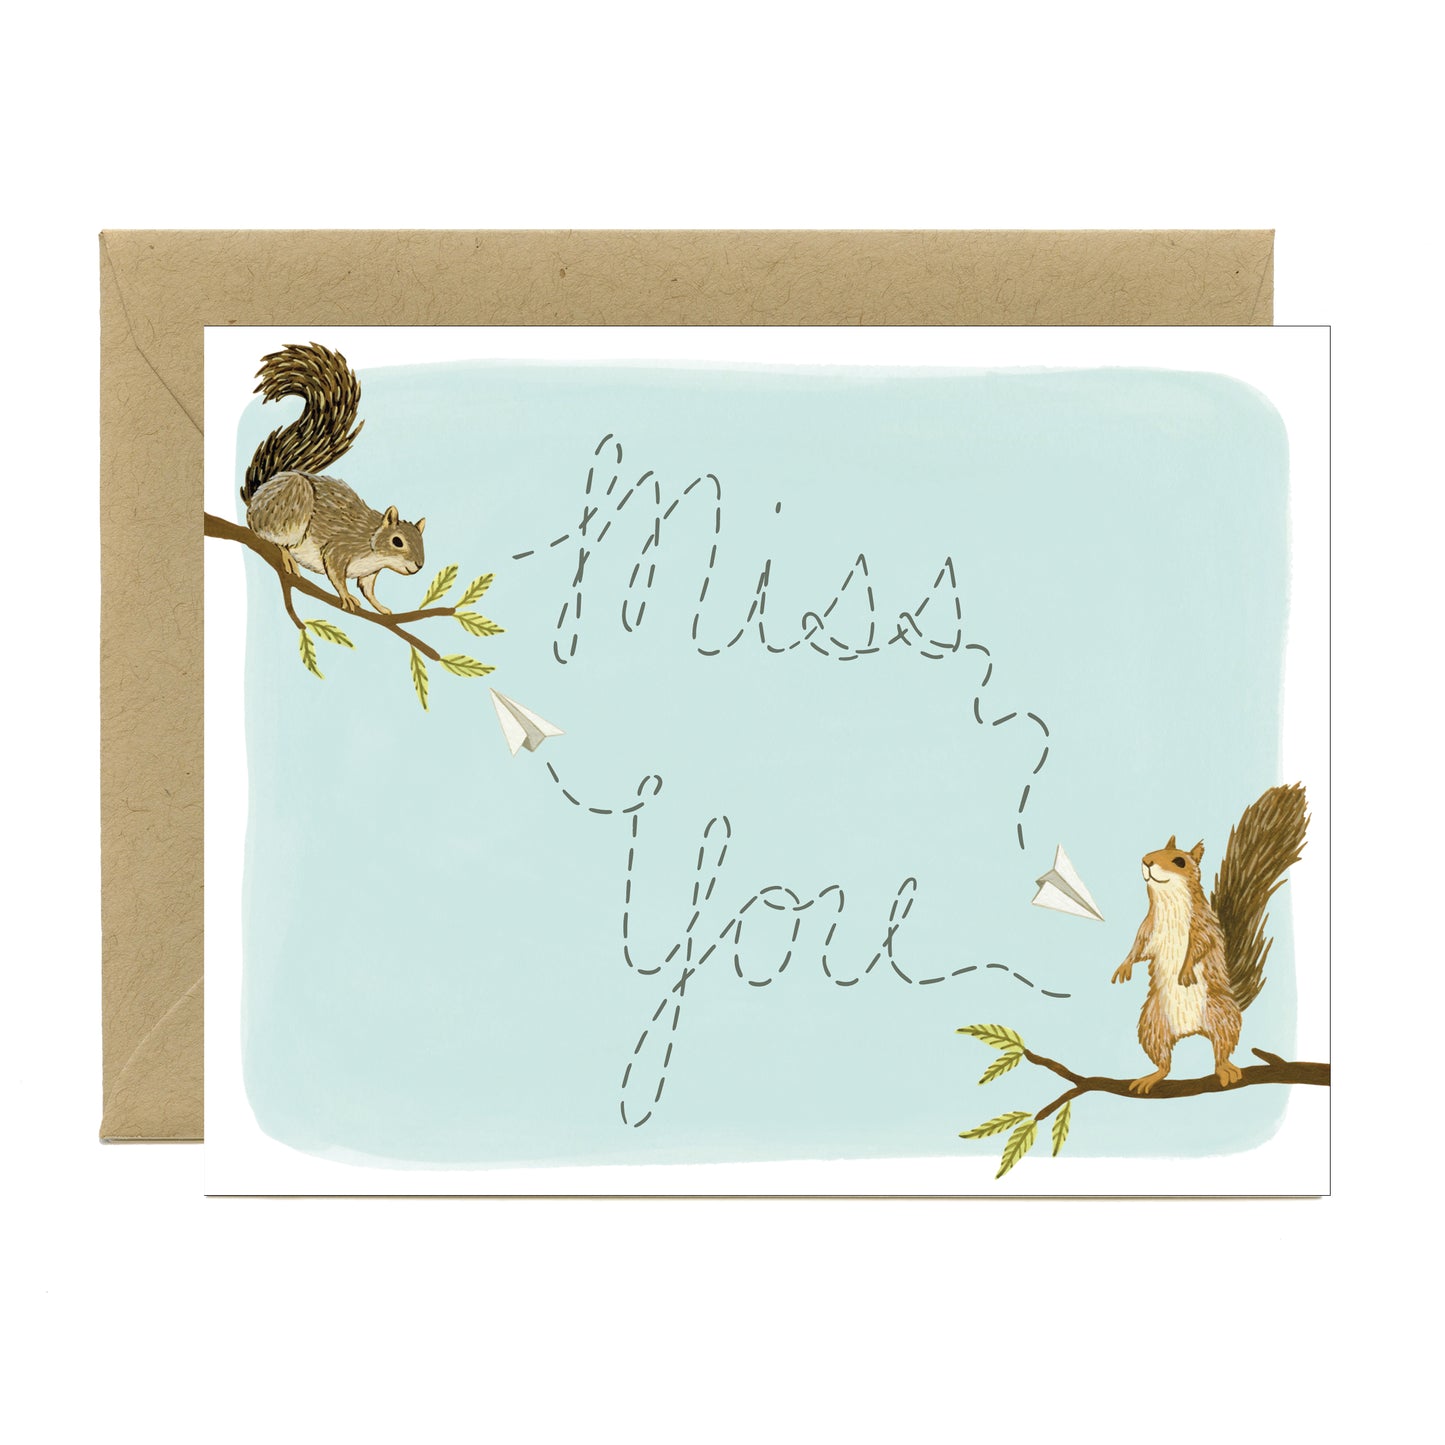 SQUIRRELS AND PAPER AIRPLANES - MISS YOU GREETING CARD